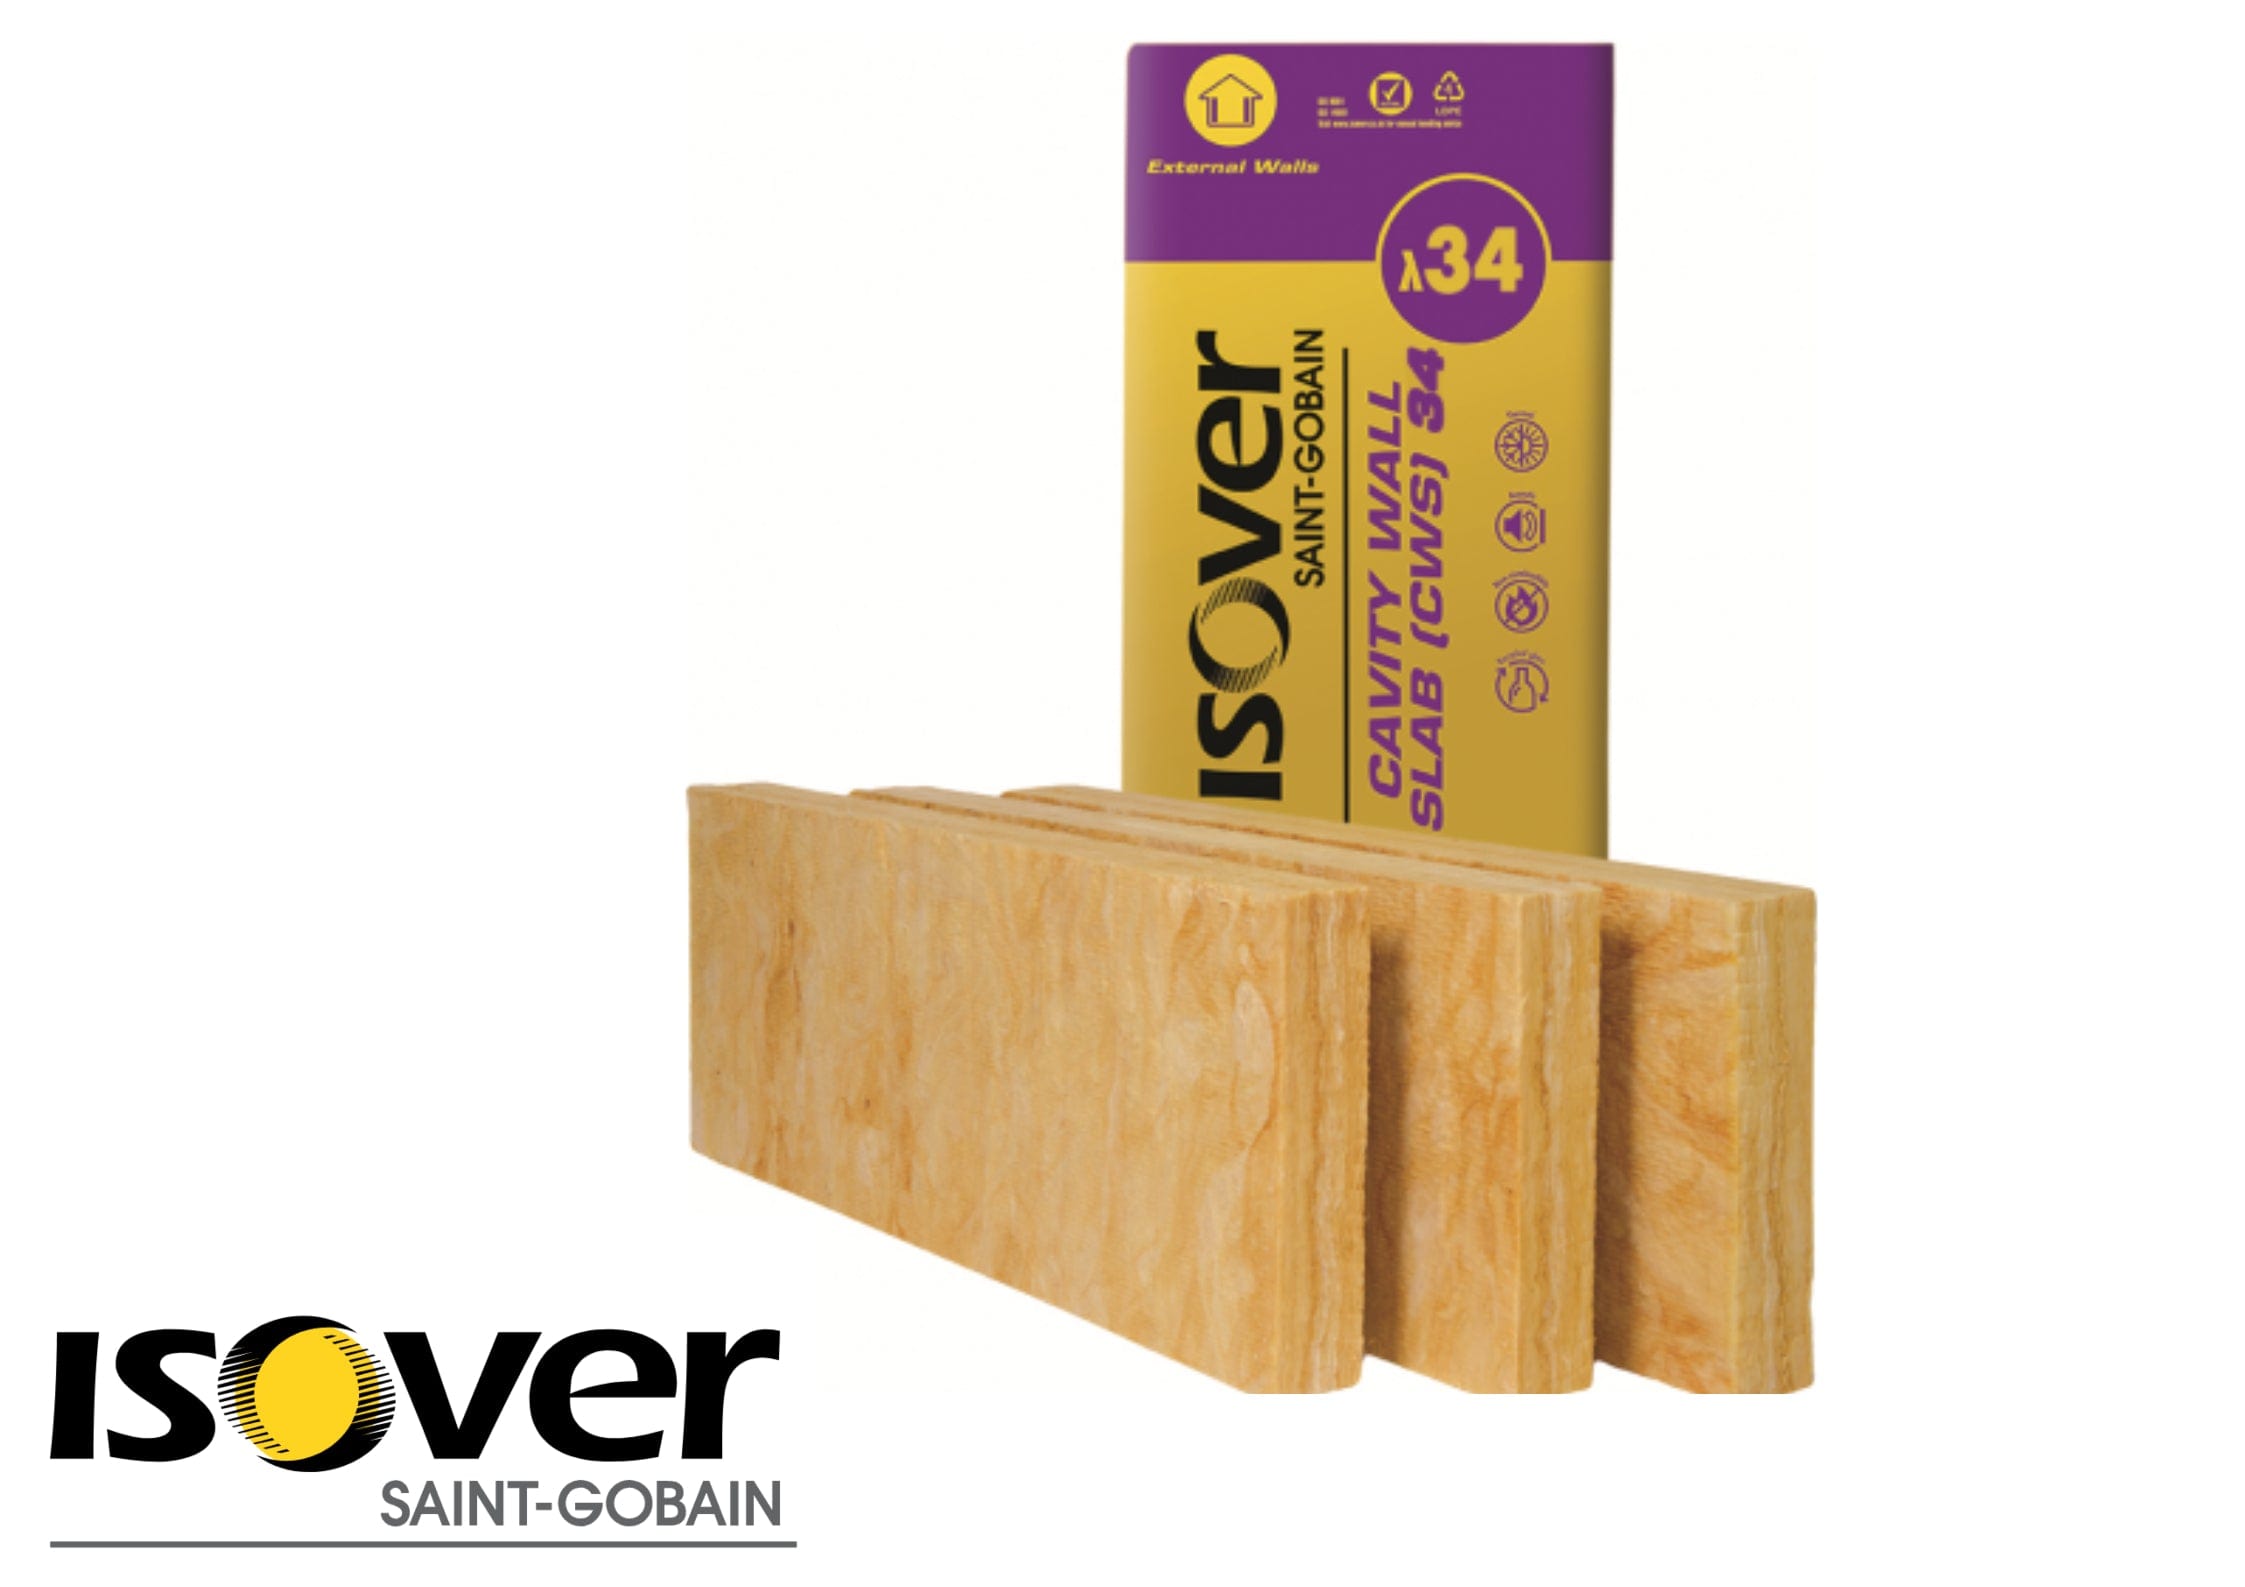 Isover Insulation Isover Cavity Wall Slab CWS 34 Isover Cavity Wall Slab CWS 34 - insulationuk.co.uk